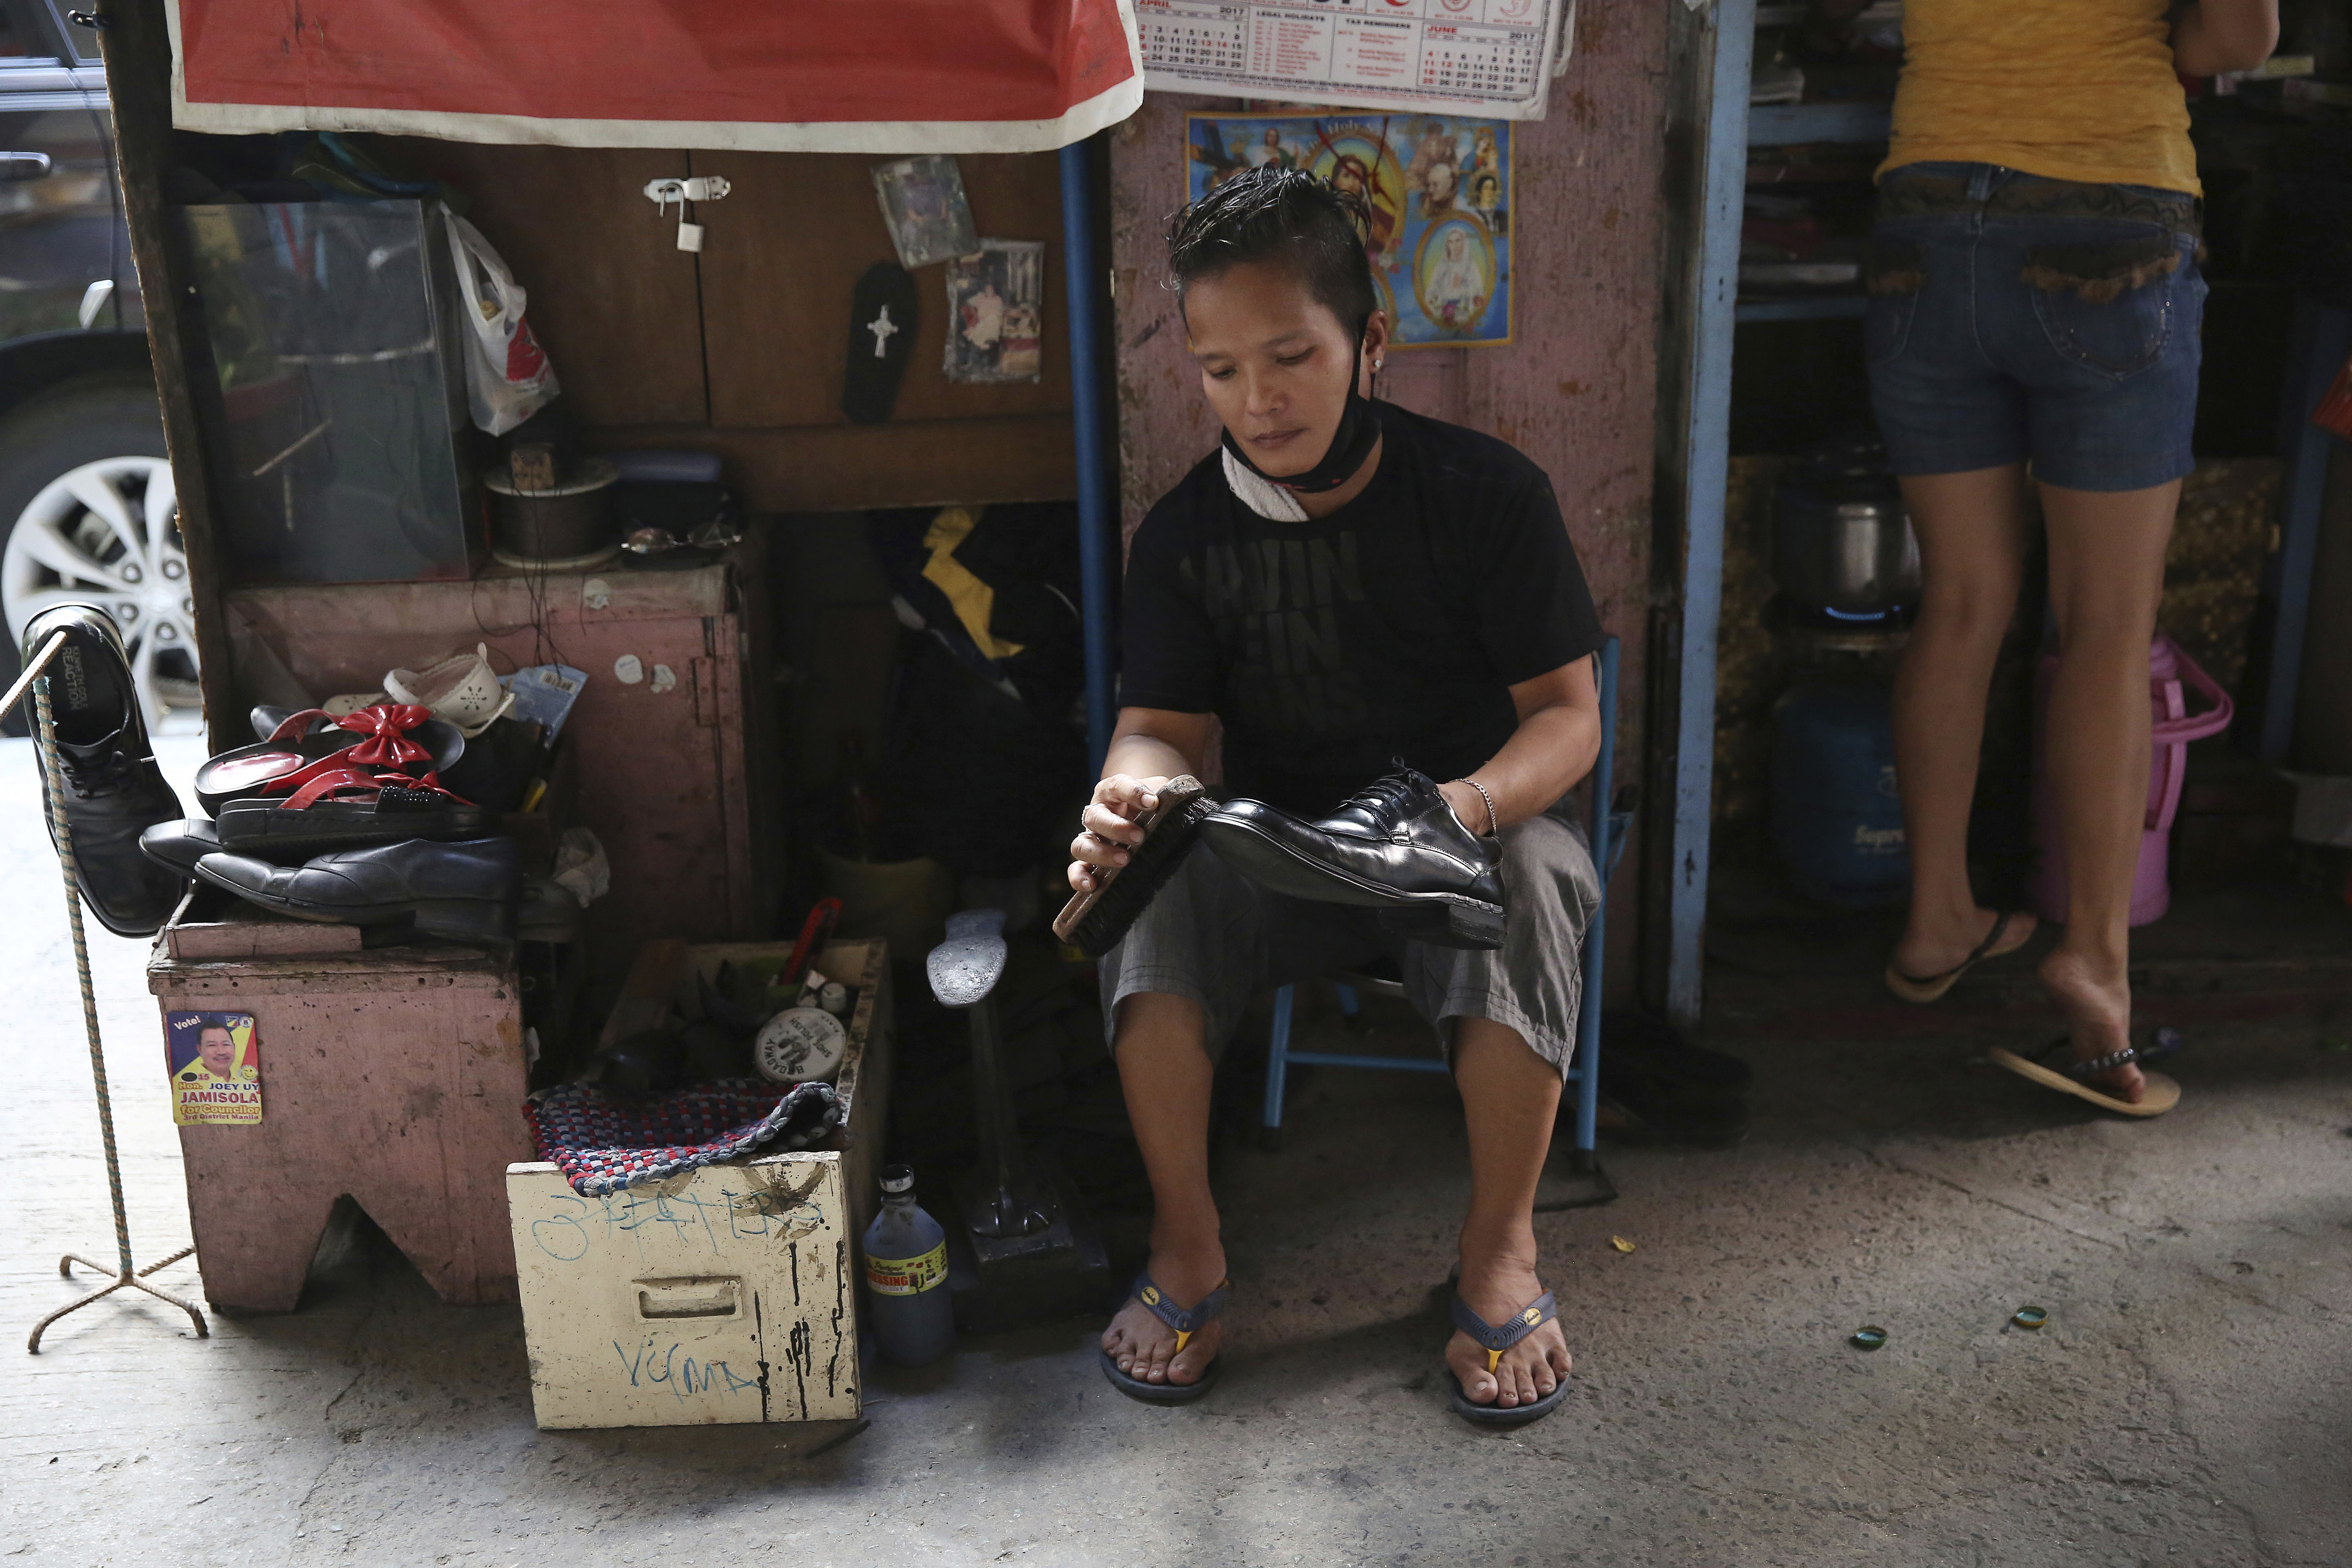 Vilma Magpayo cleans shoes for P20 (about US40 cents) per pair at her makeshift stall in downtown Manila, Philippines Tuesday, May 16, 2017. Magpayo said she earns about 300 pesos (about US$6) a day from cleaning and repairing shoes. (AP Photo/Aaron Favila)